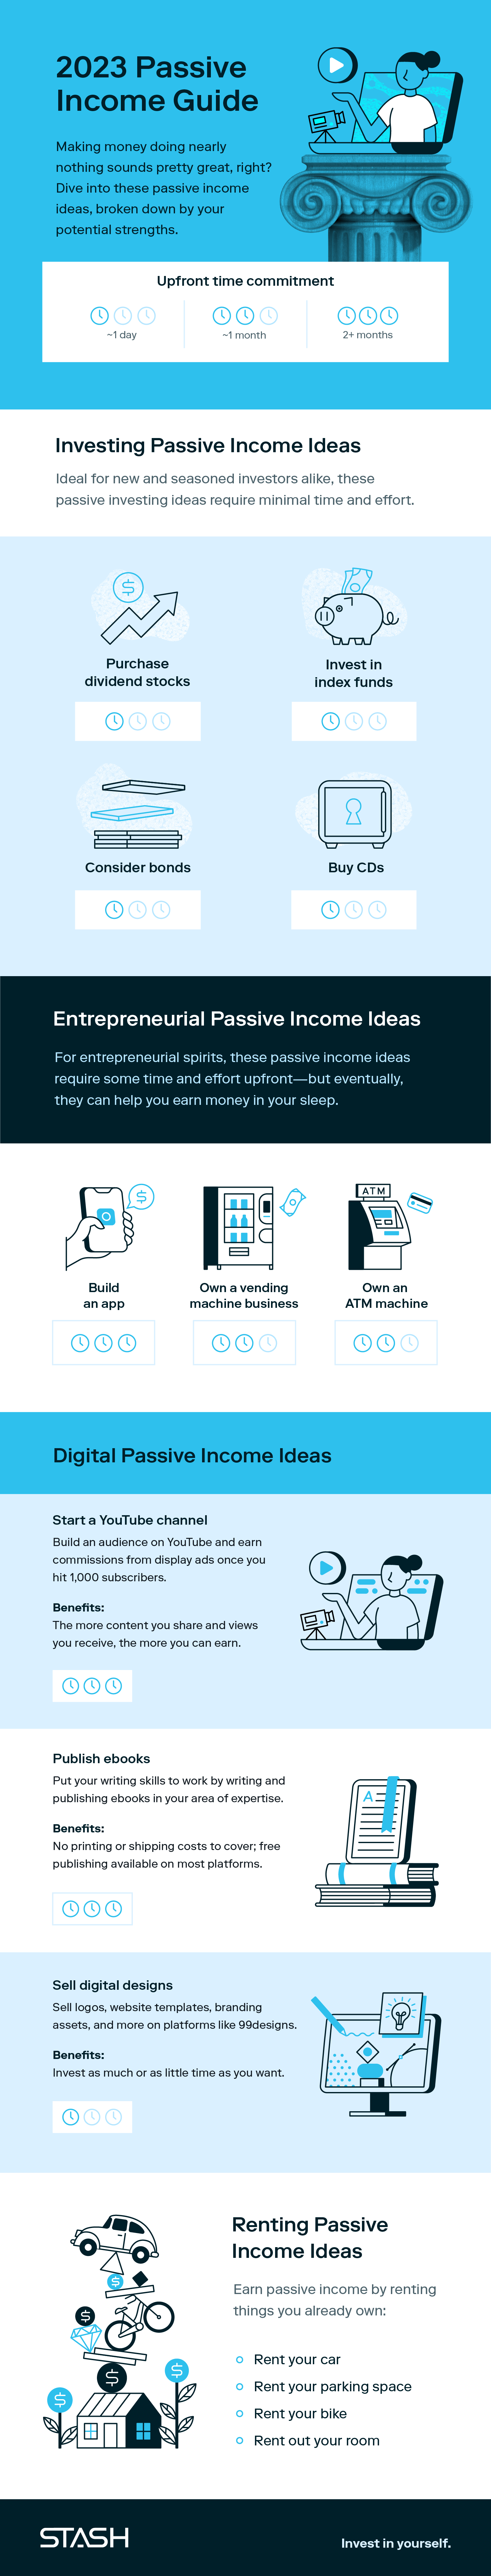 An infographic pares down ways how to make passive income, including passive income ideas that take investing, entrepreneurial, digital, and rental avenues, as well as the upfront time commitments for each.